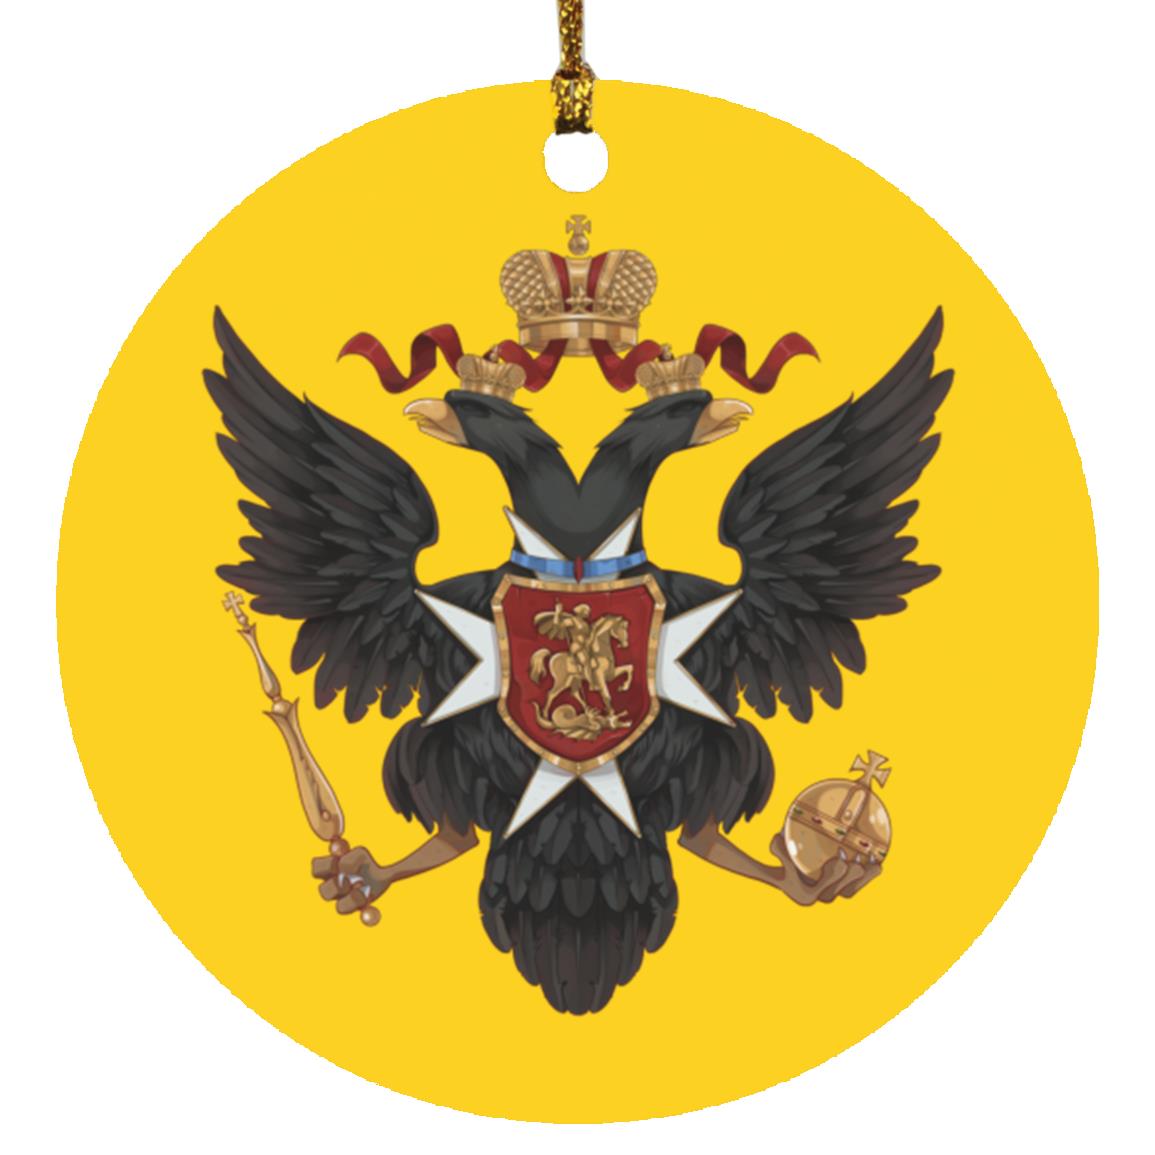 Byzantine Double Headed Eagle Imperial Crest or Royal Coat of Arms